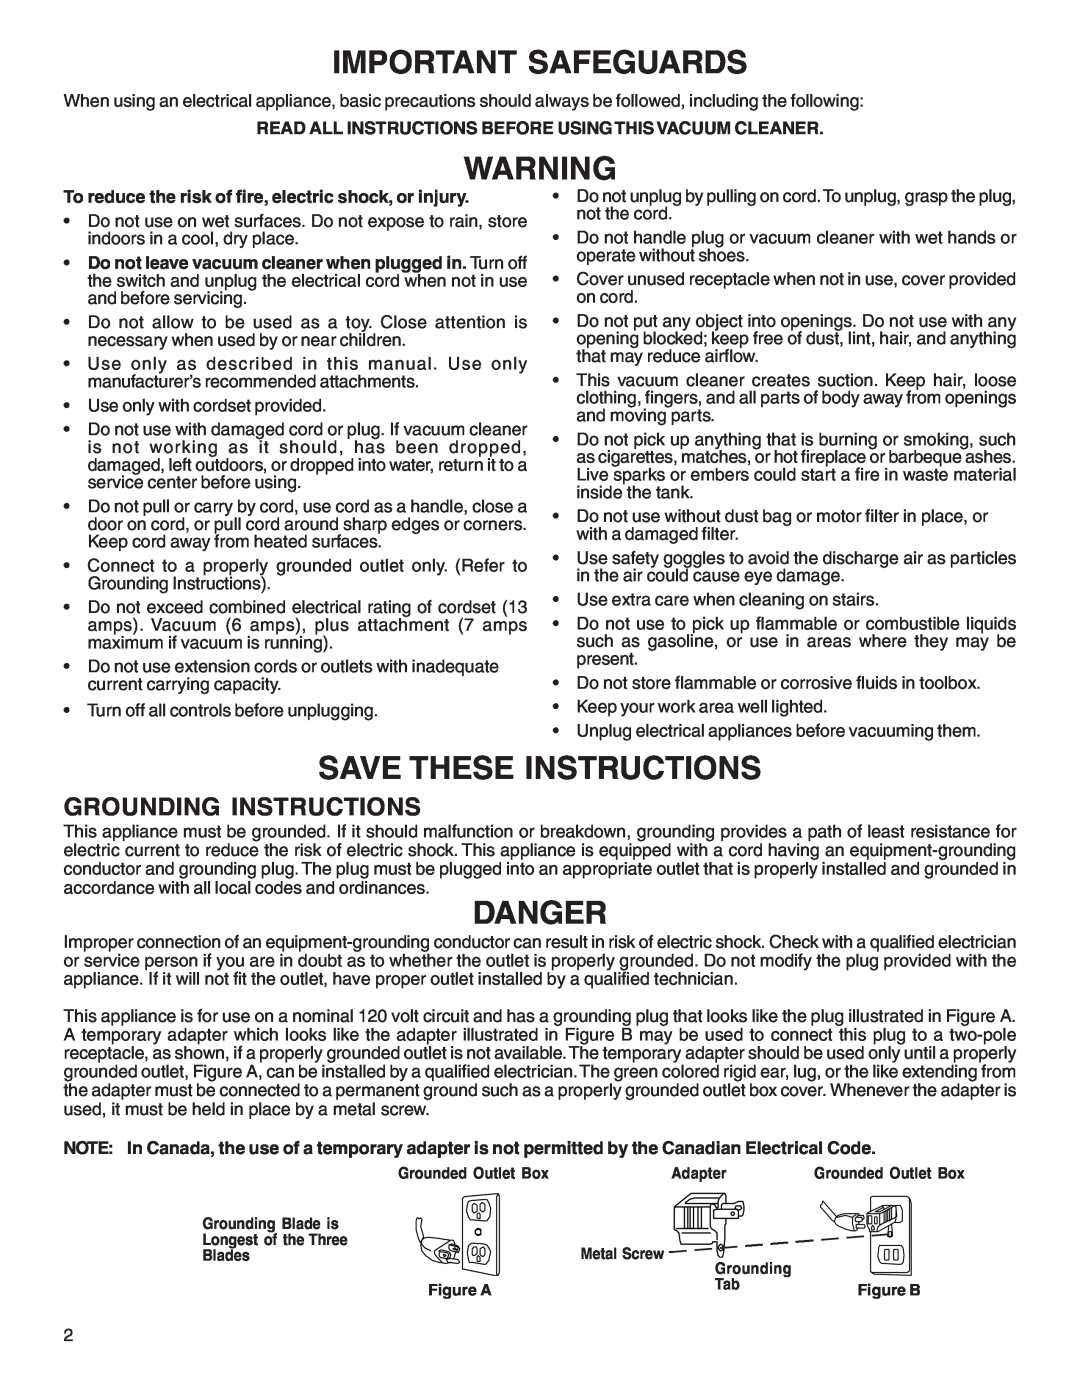 Sanitaire 1040 warranty Grounding Instructions, Important Safeguards, Save These Instructions, Danger 